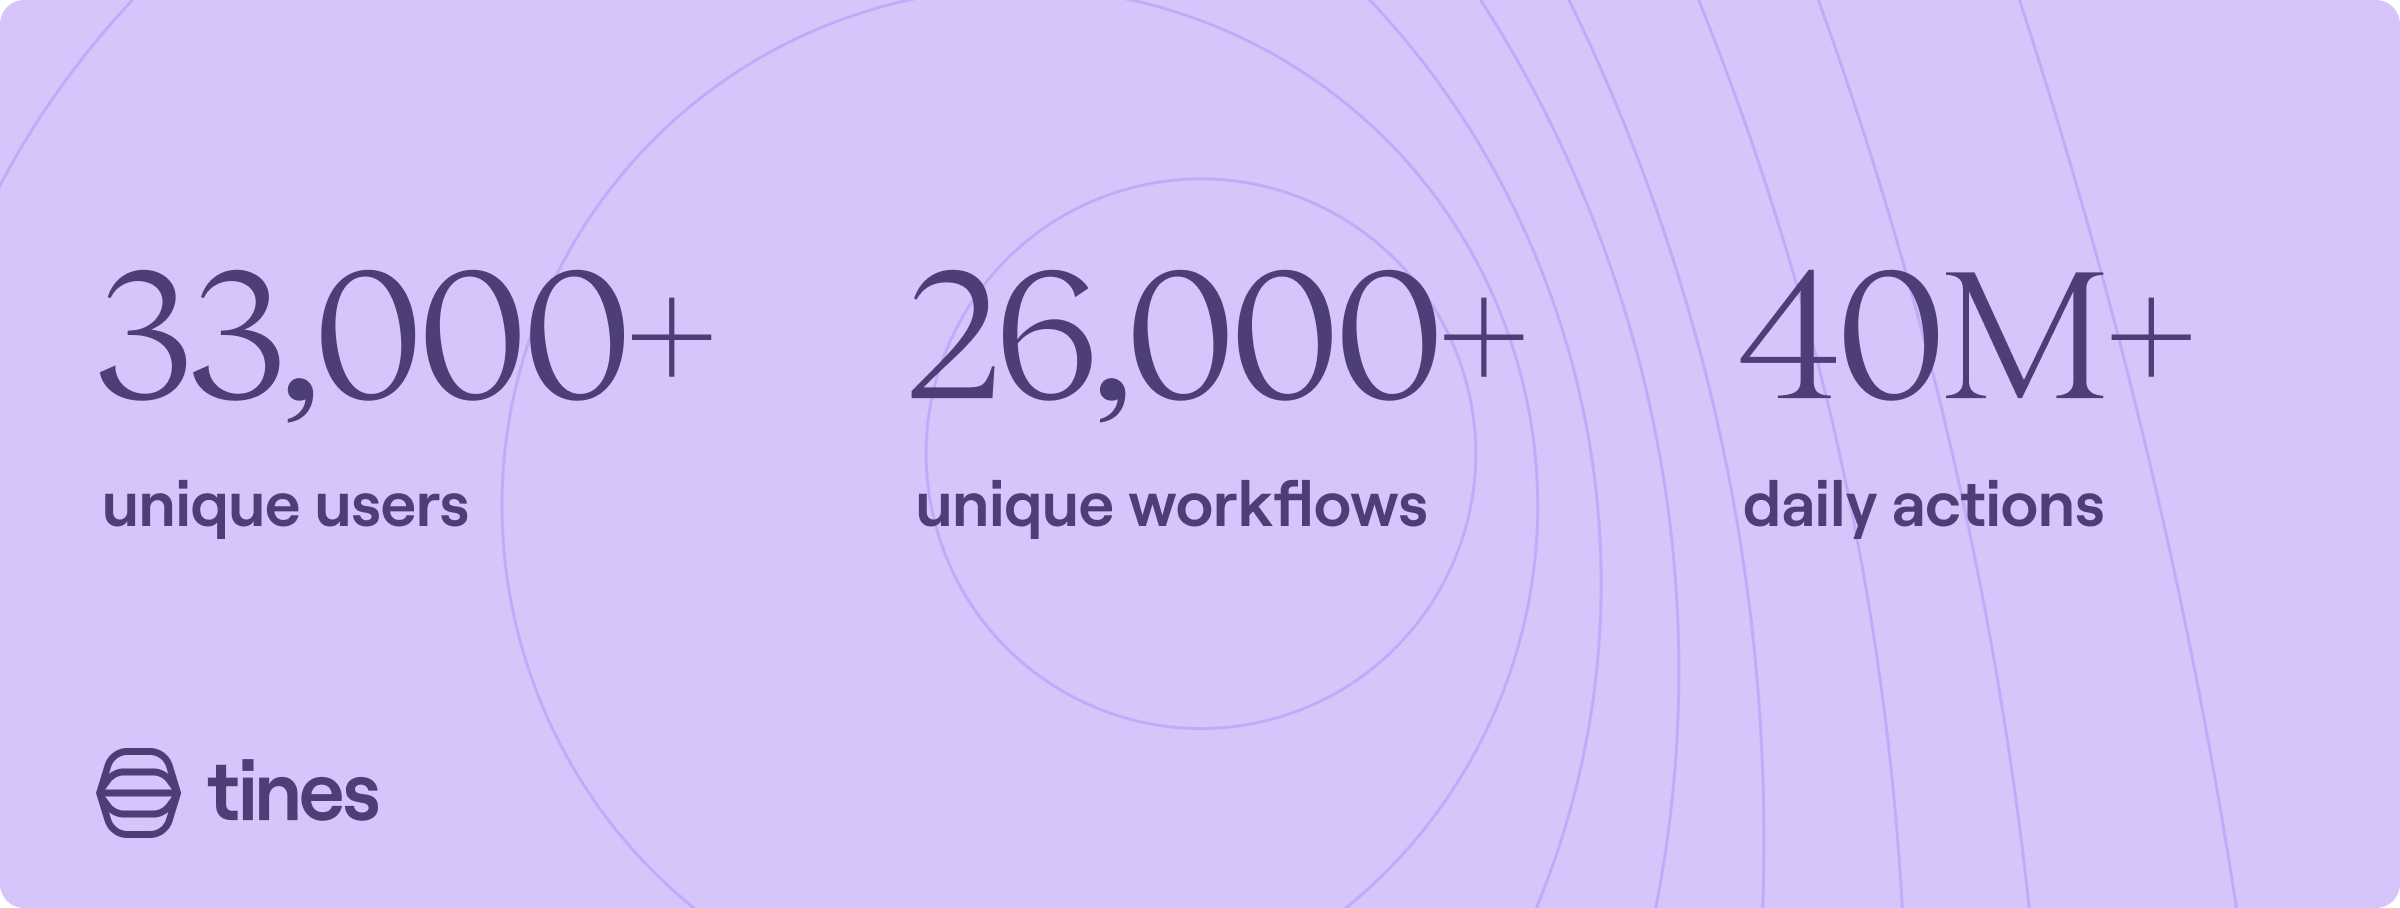 Tines has 33,000 unique users, 26,000 unique workflows and 40M daily actions